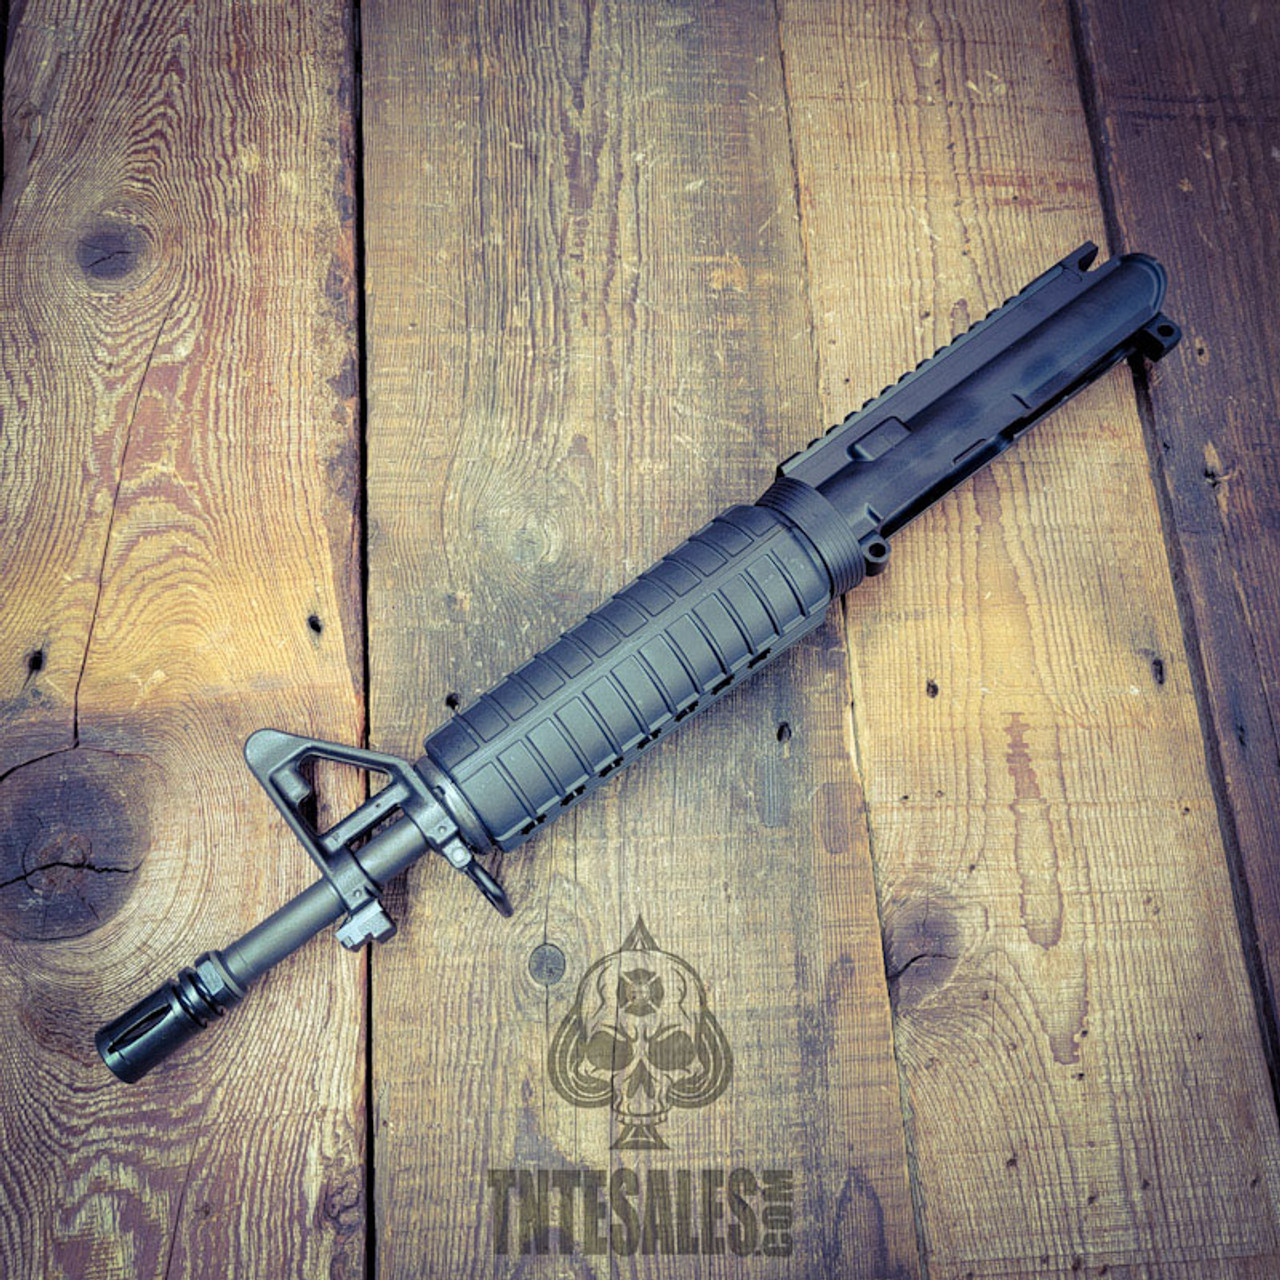  "6933" Style 11.5 Commando Hammer Forged Pencil Upper 